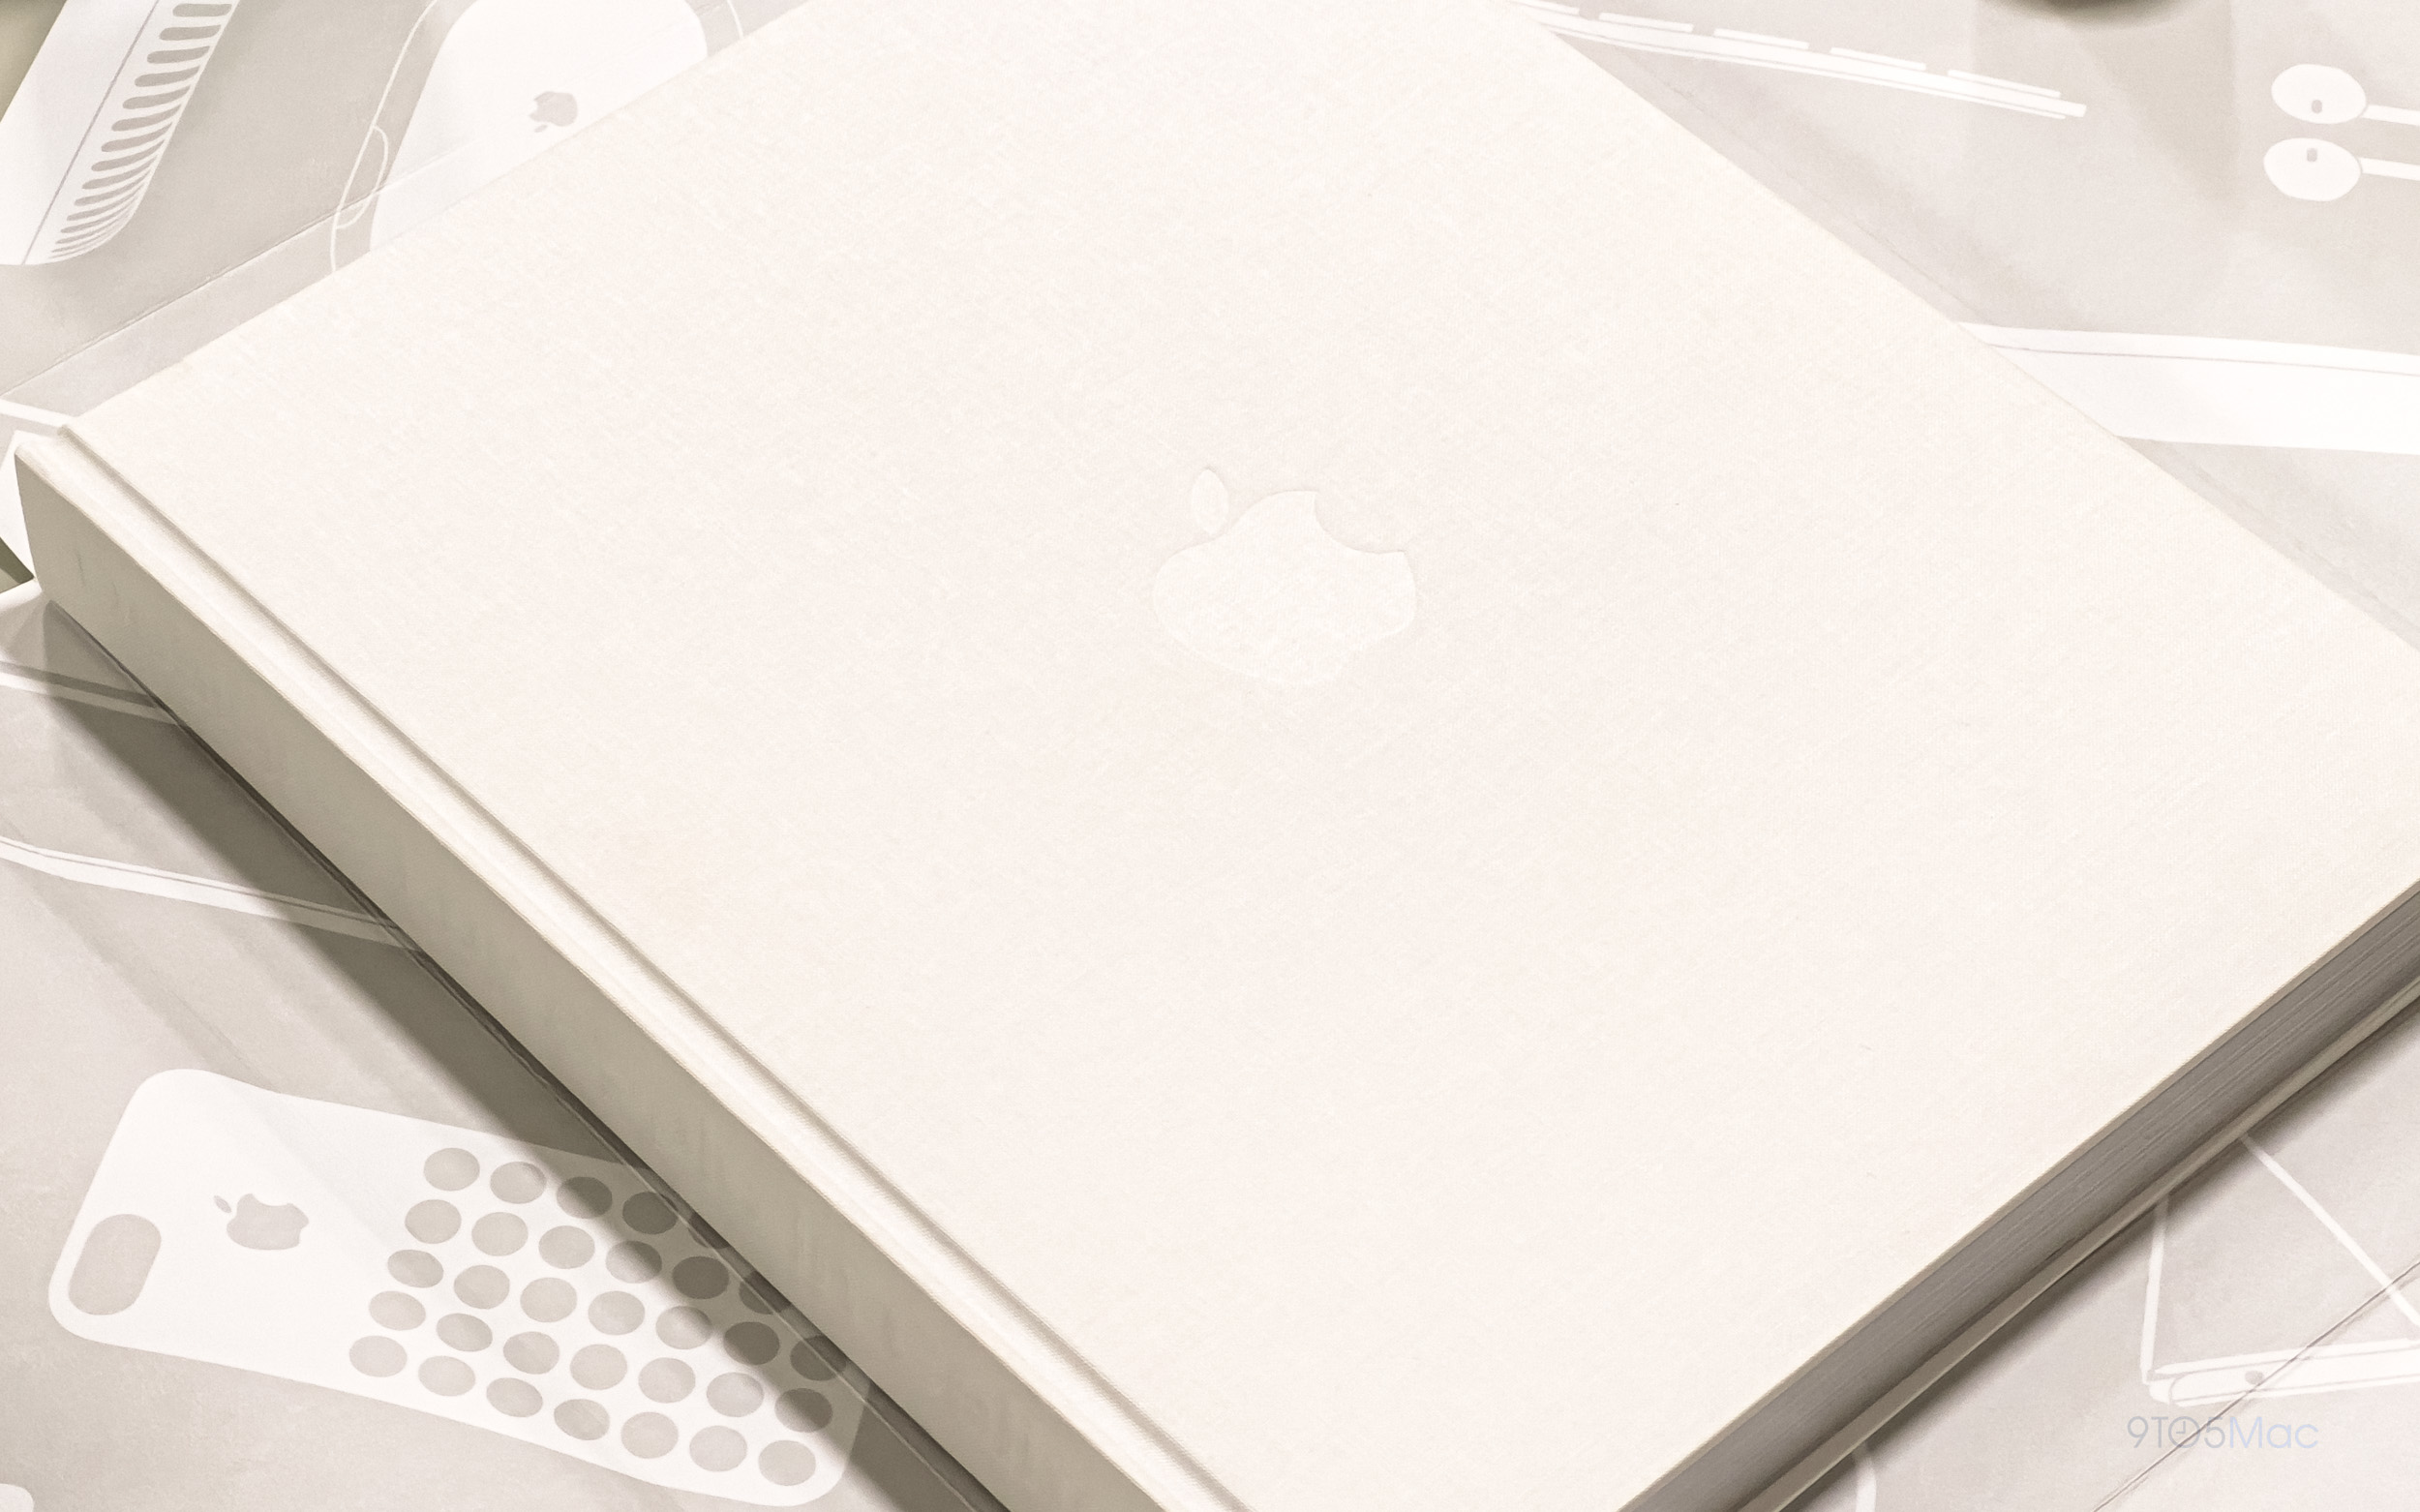 Tidbits on discontinued book 'Designed by Apple in California'